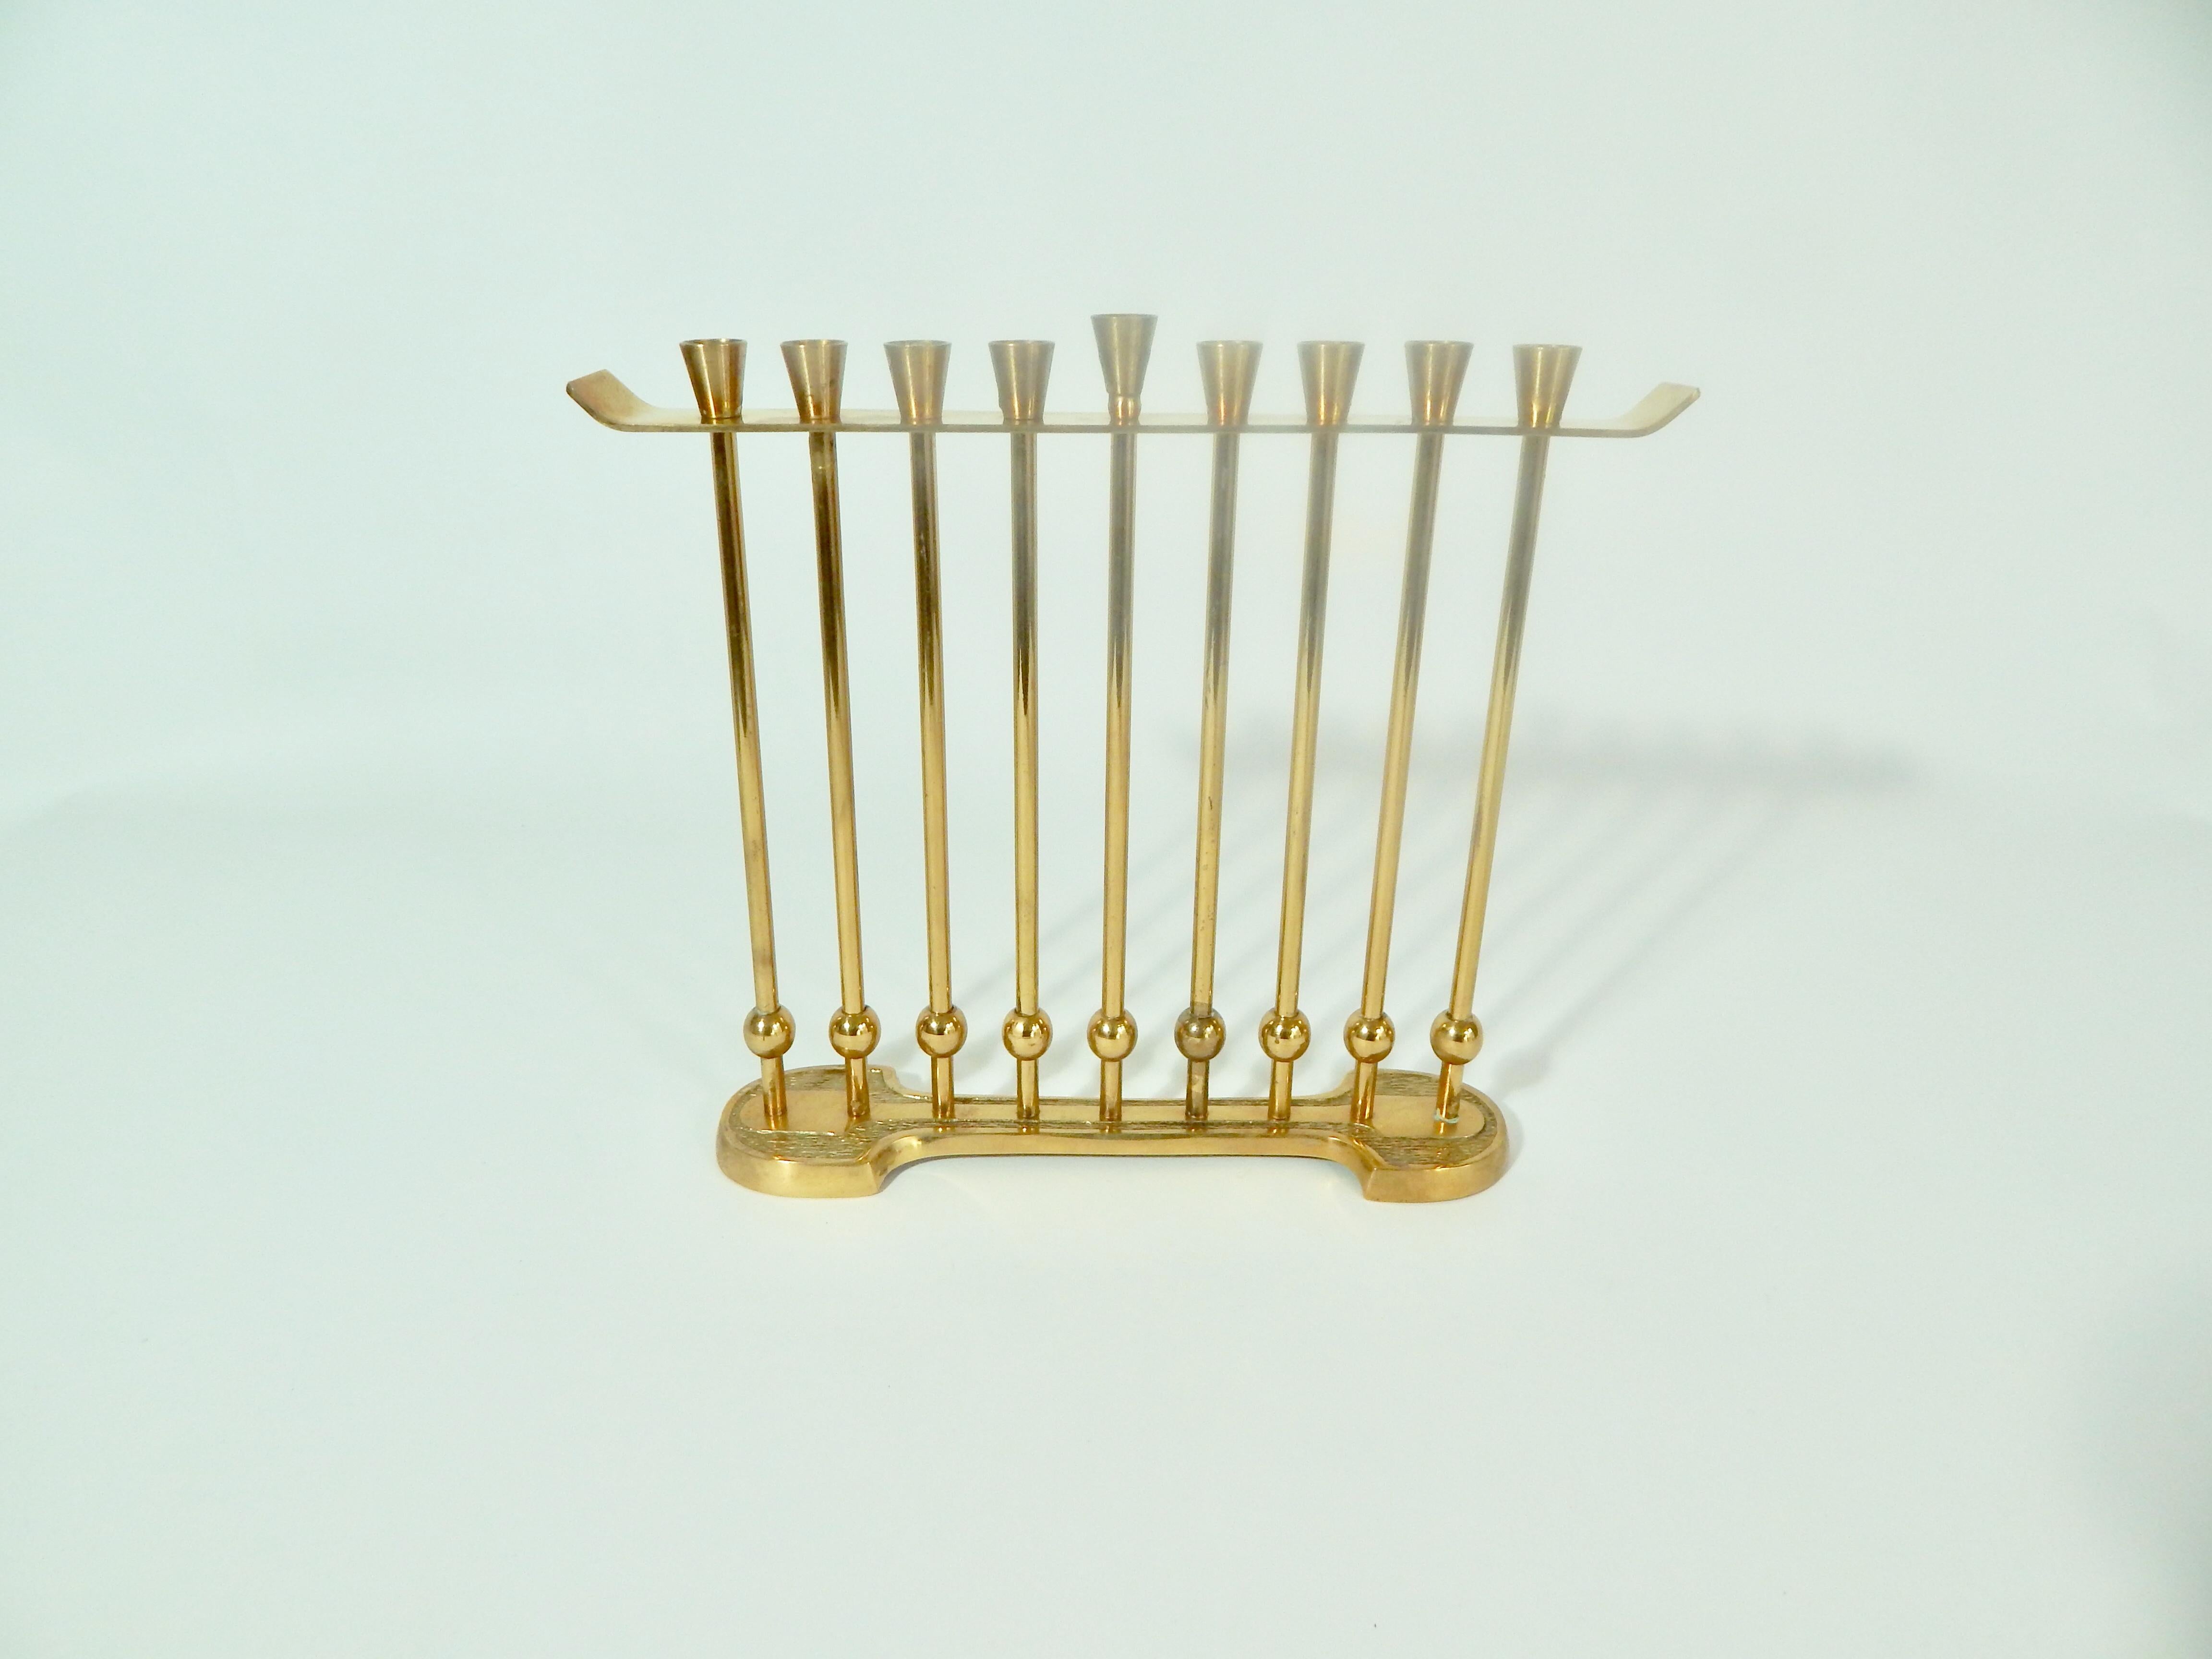 Solid brass midcentury Menorah by Wainberg. Made in Israel. All pieces can be disassembled for cleaning or polishing.
We offer free complimentary domestic shipping for this item. 